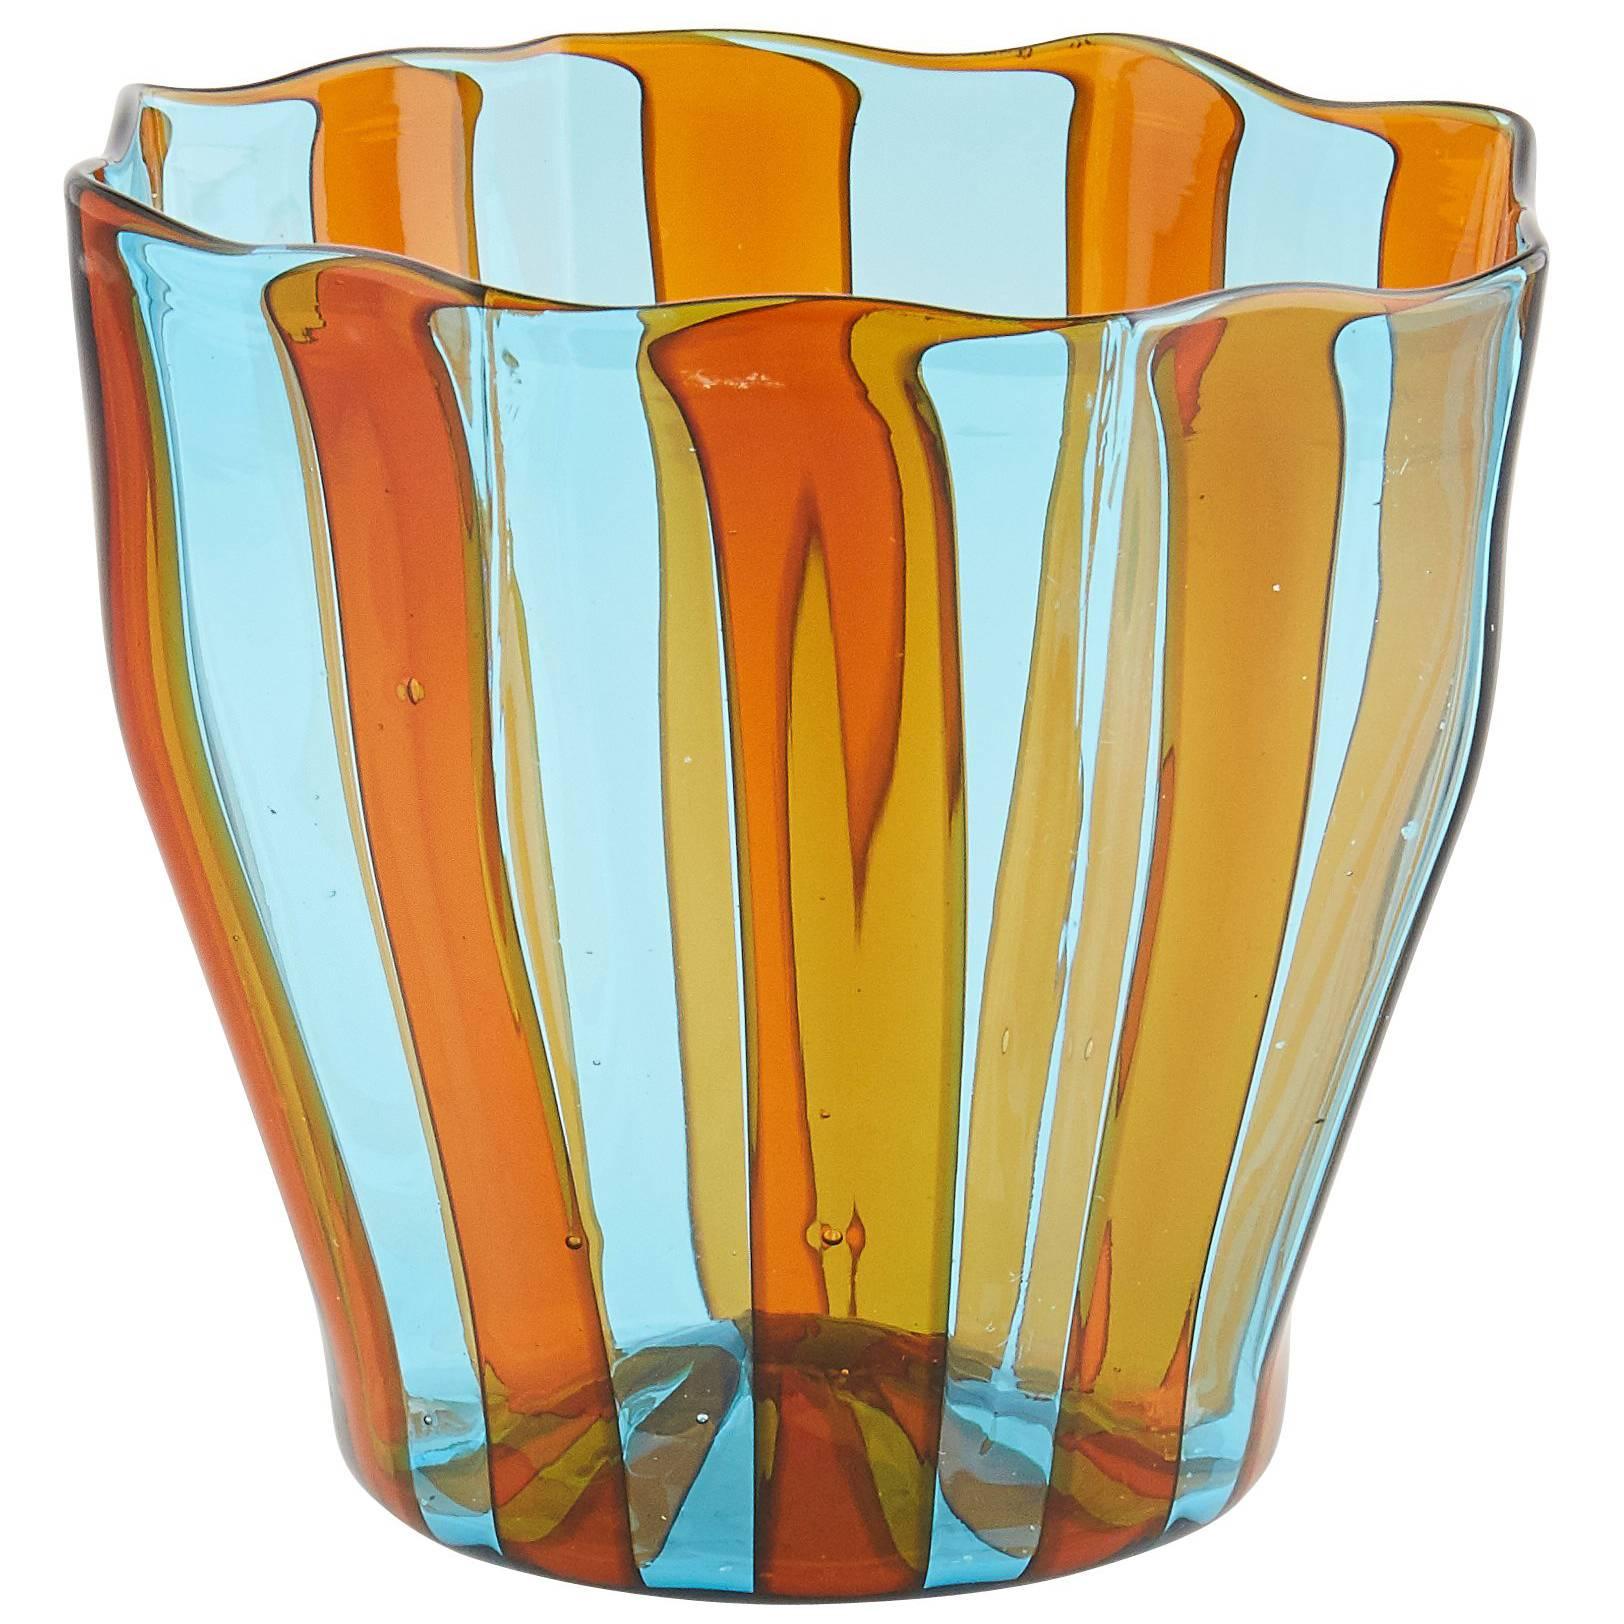 Campbell-Rey Octagonal Striped Tumbler in Amber and Turquoise Murano Glass